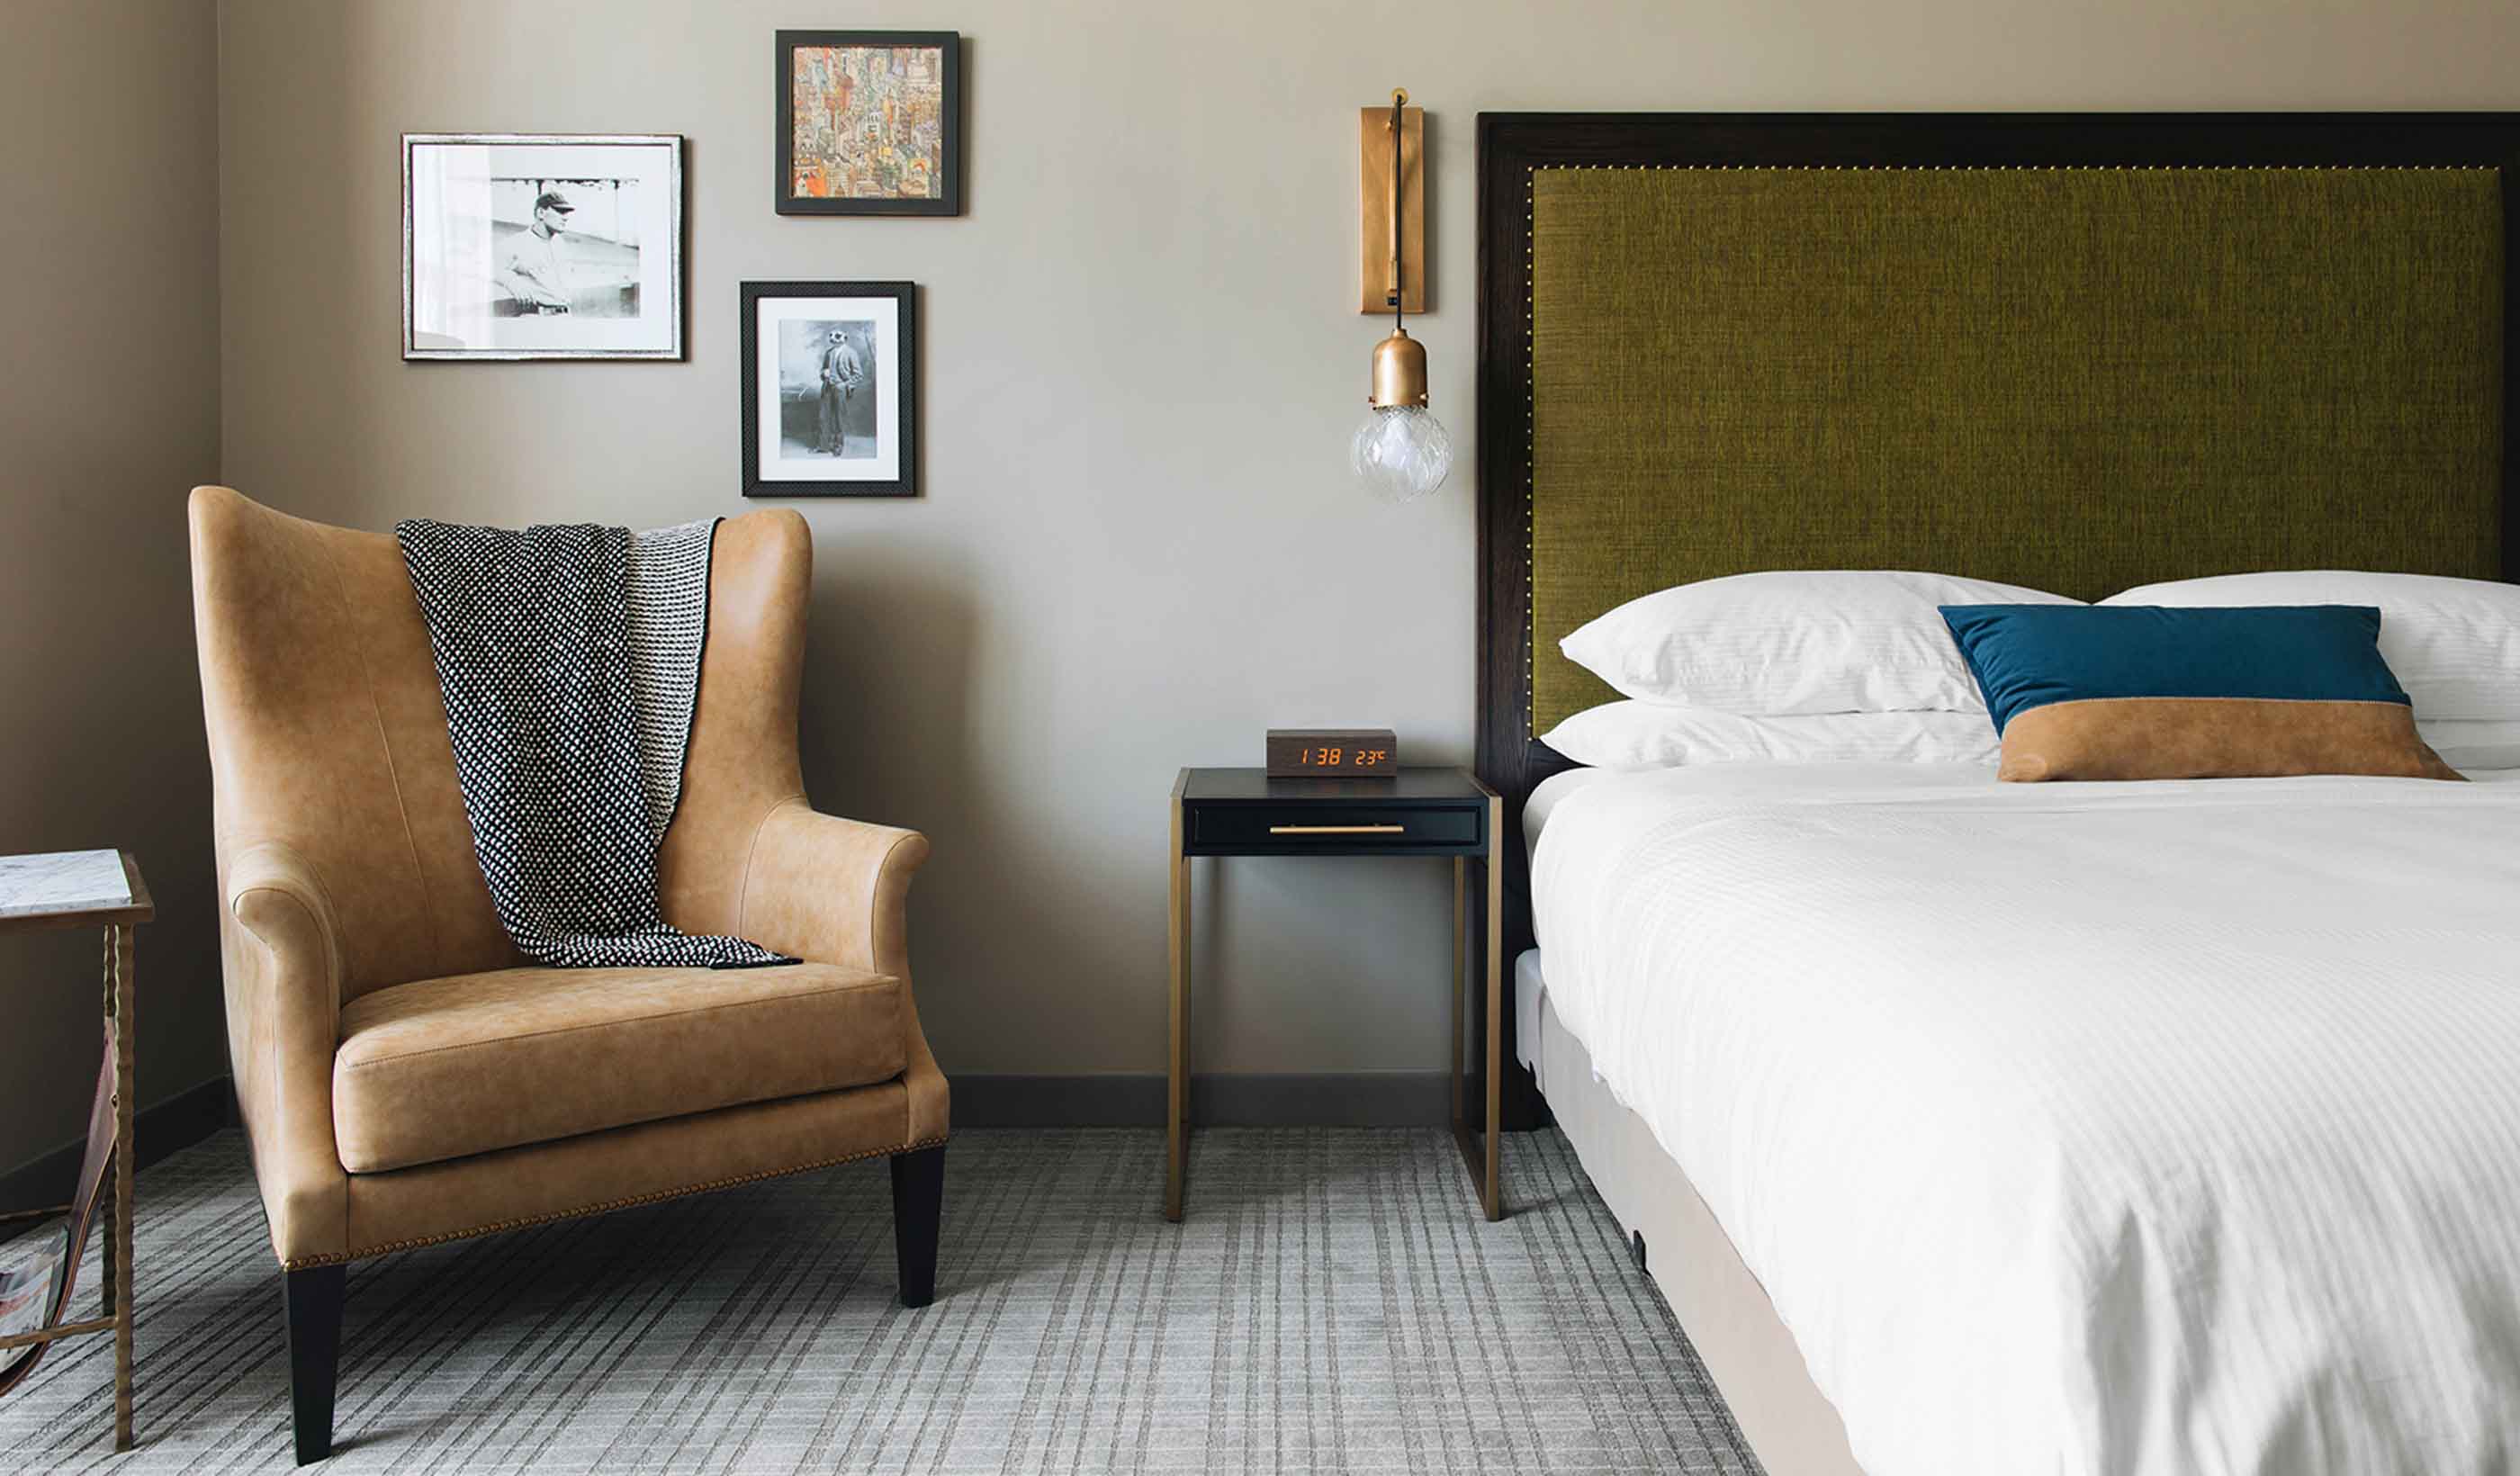 What makes a boutique hotel stand out from the rest?